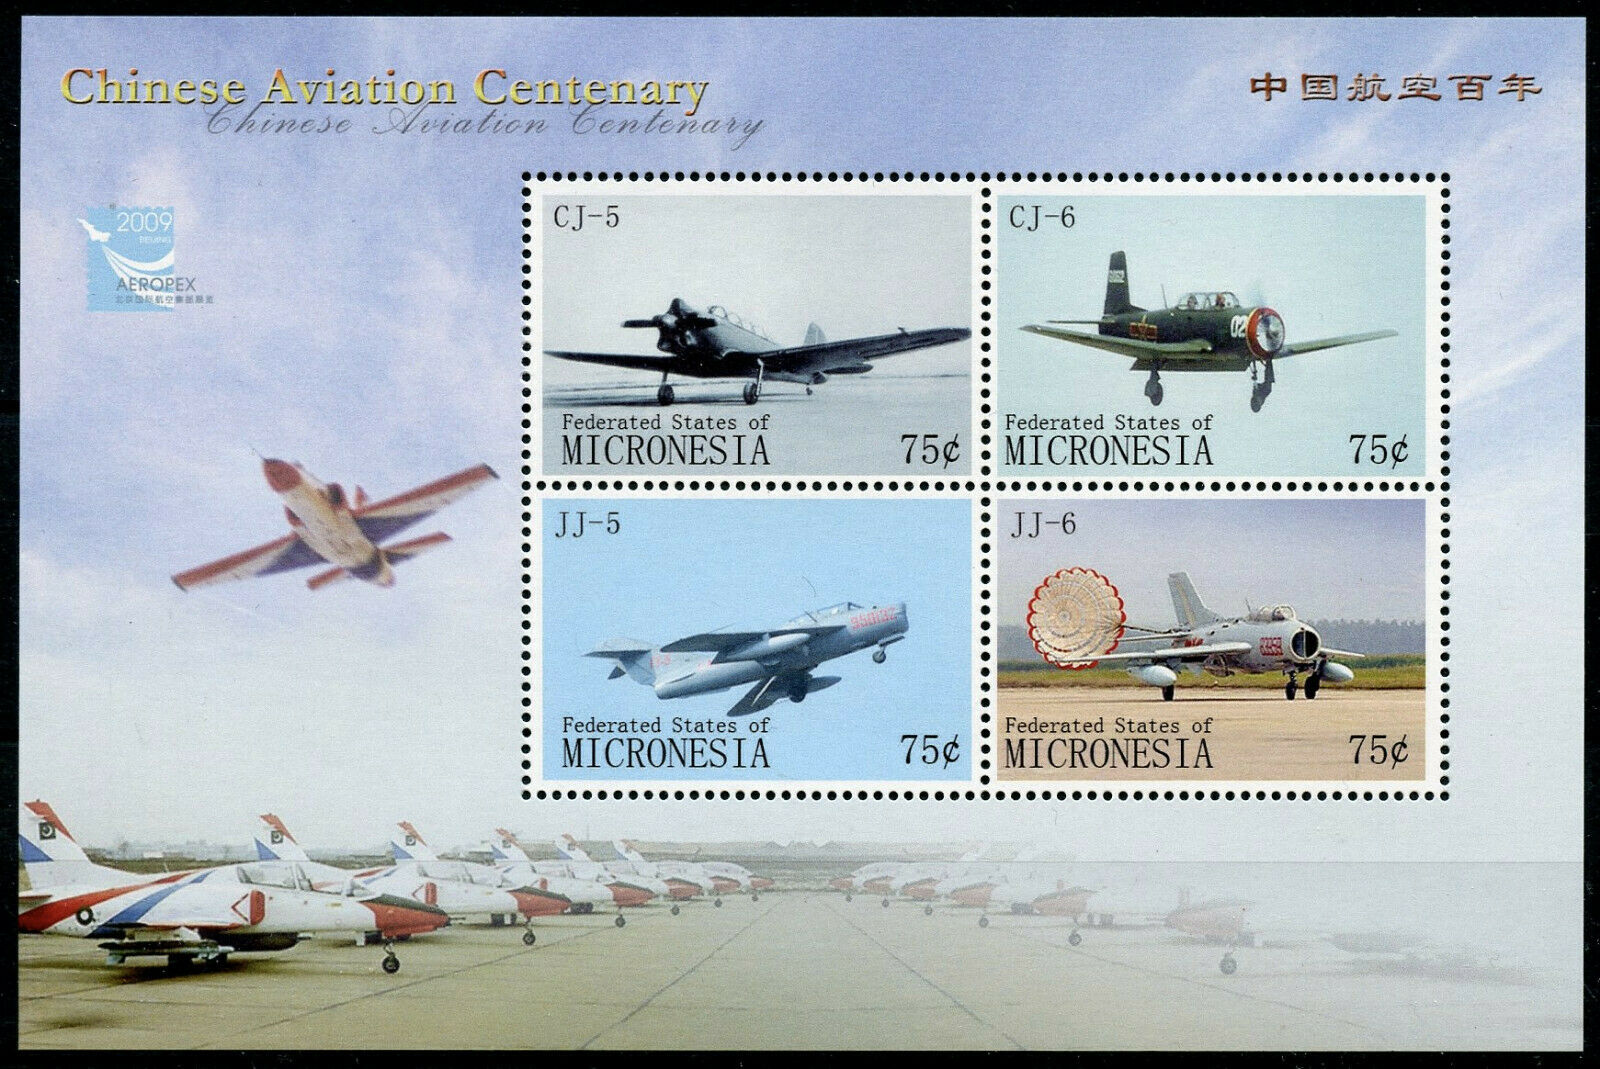 Micronesia Military Stamps 2007 MNH Chinese Aviation Centenary Aeropex 4v M/S